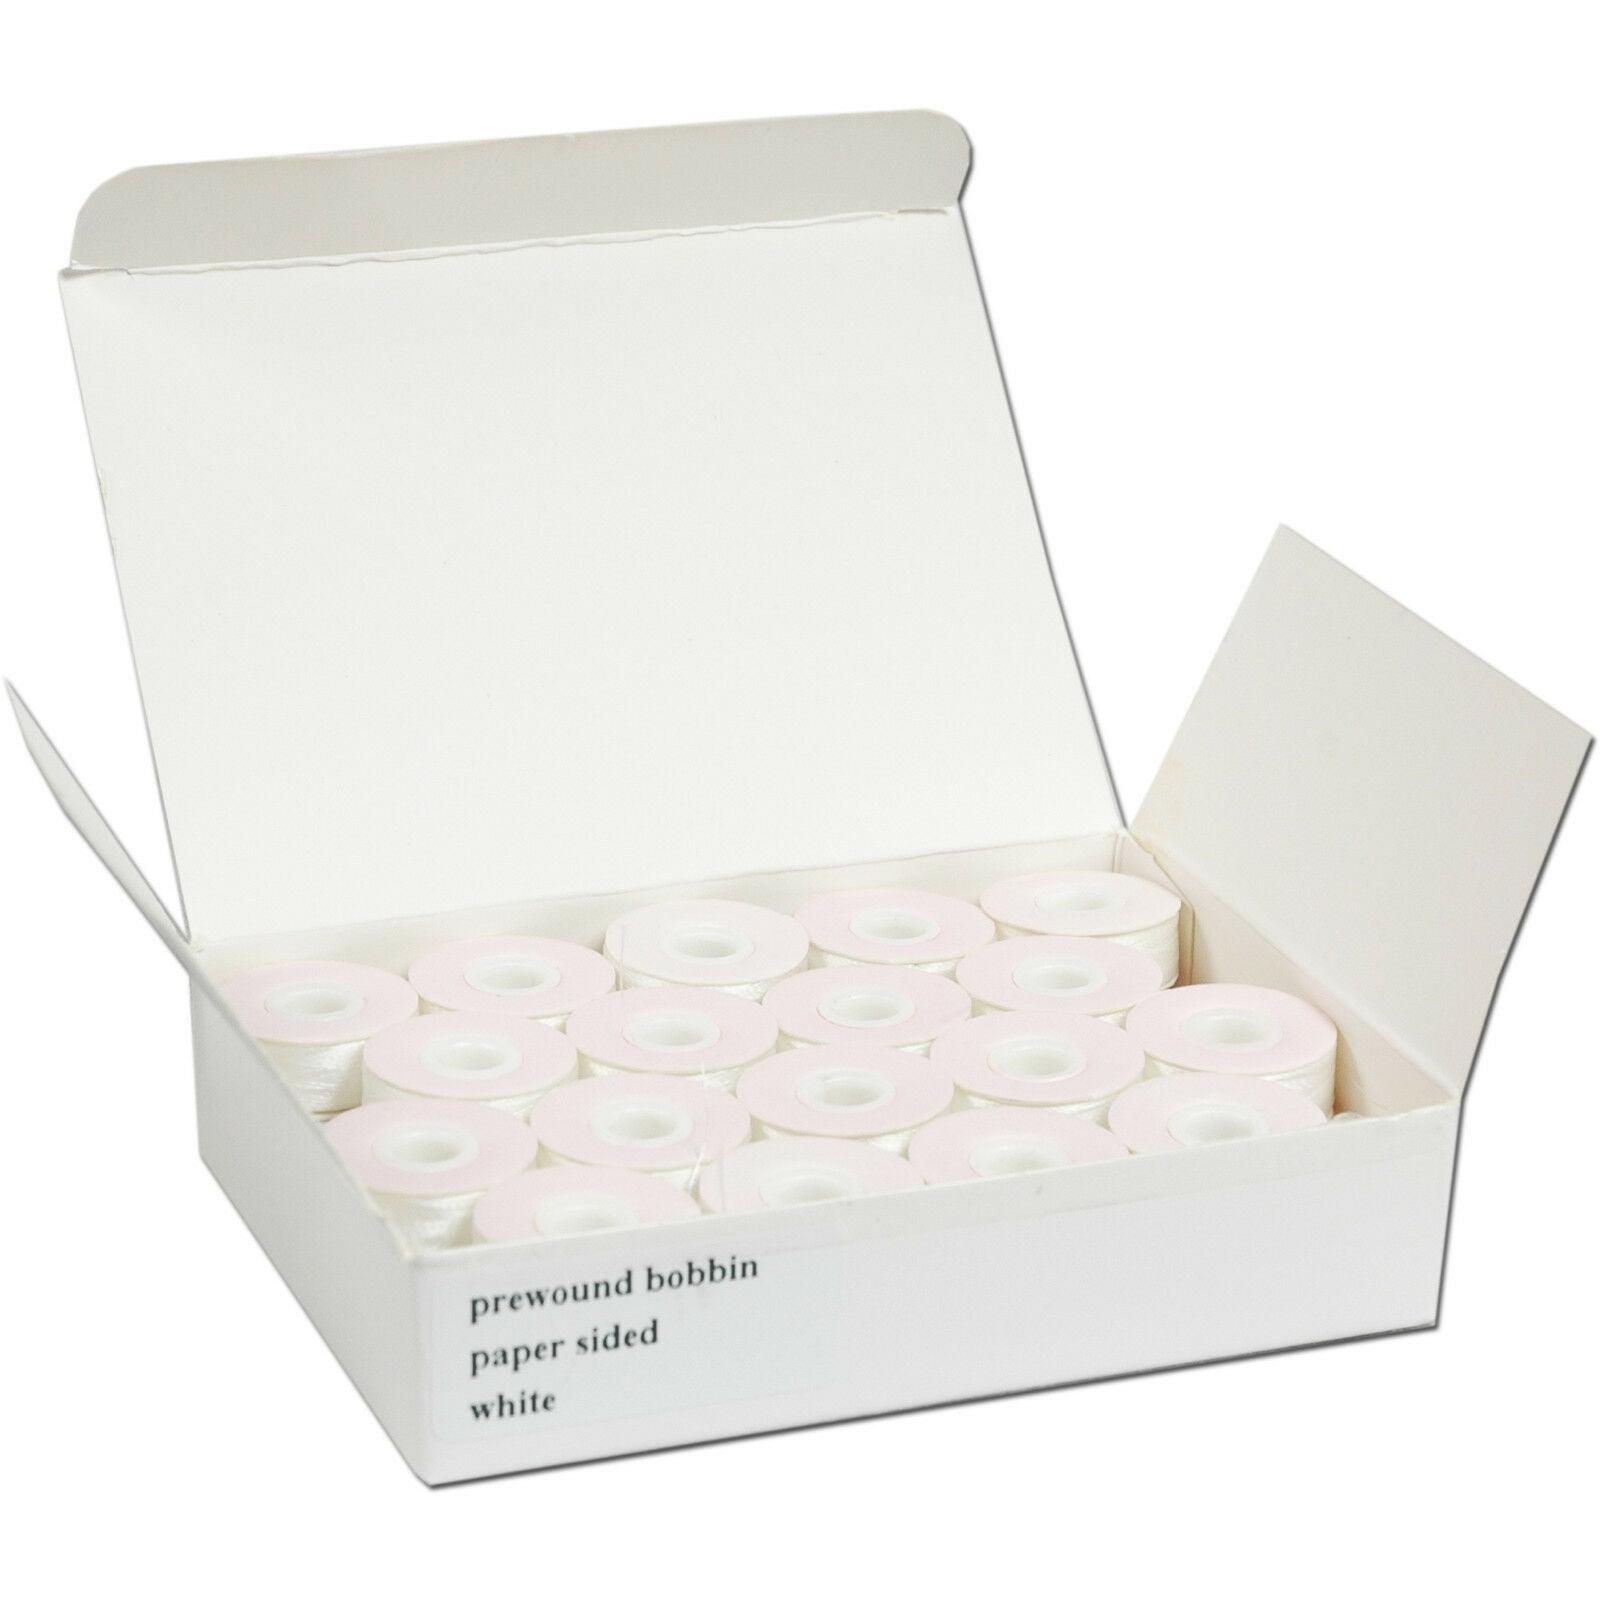 Threadart Prewound Embroidery Bobbins - 144 Count Per Box - White Cardboard  Sided - L Style - 6 Options Available 